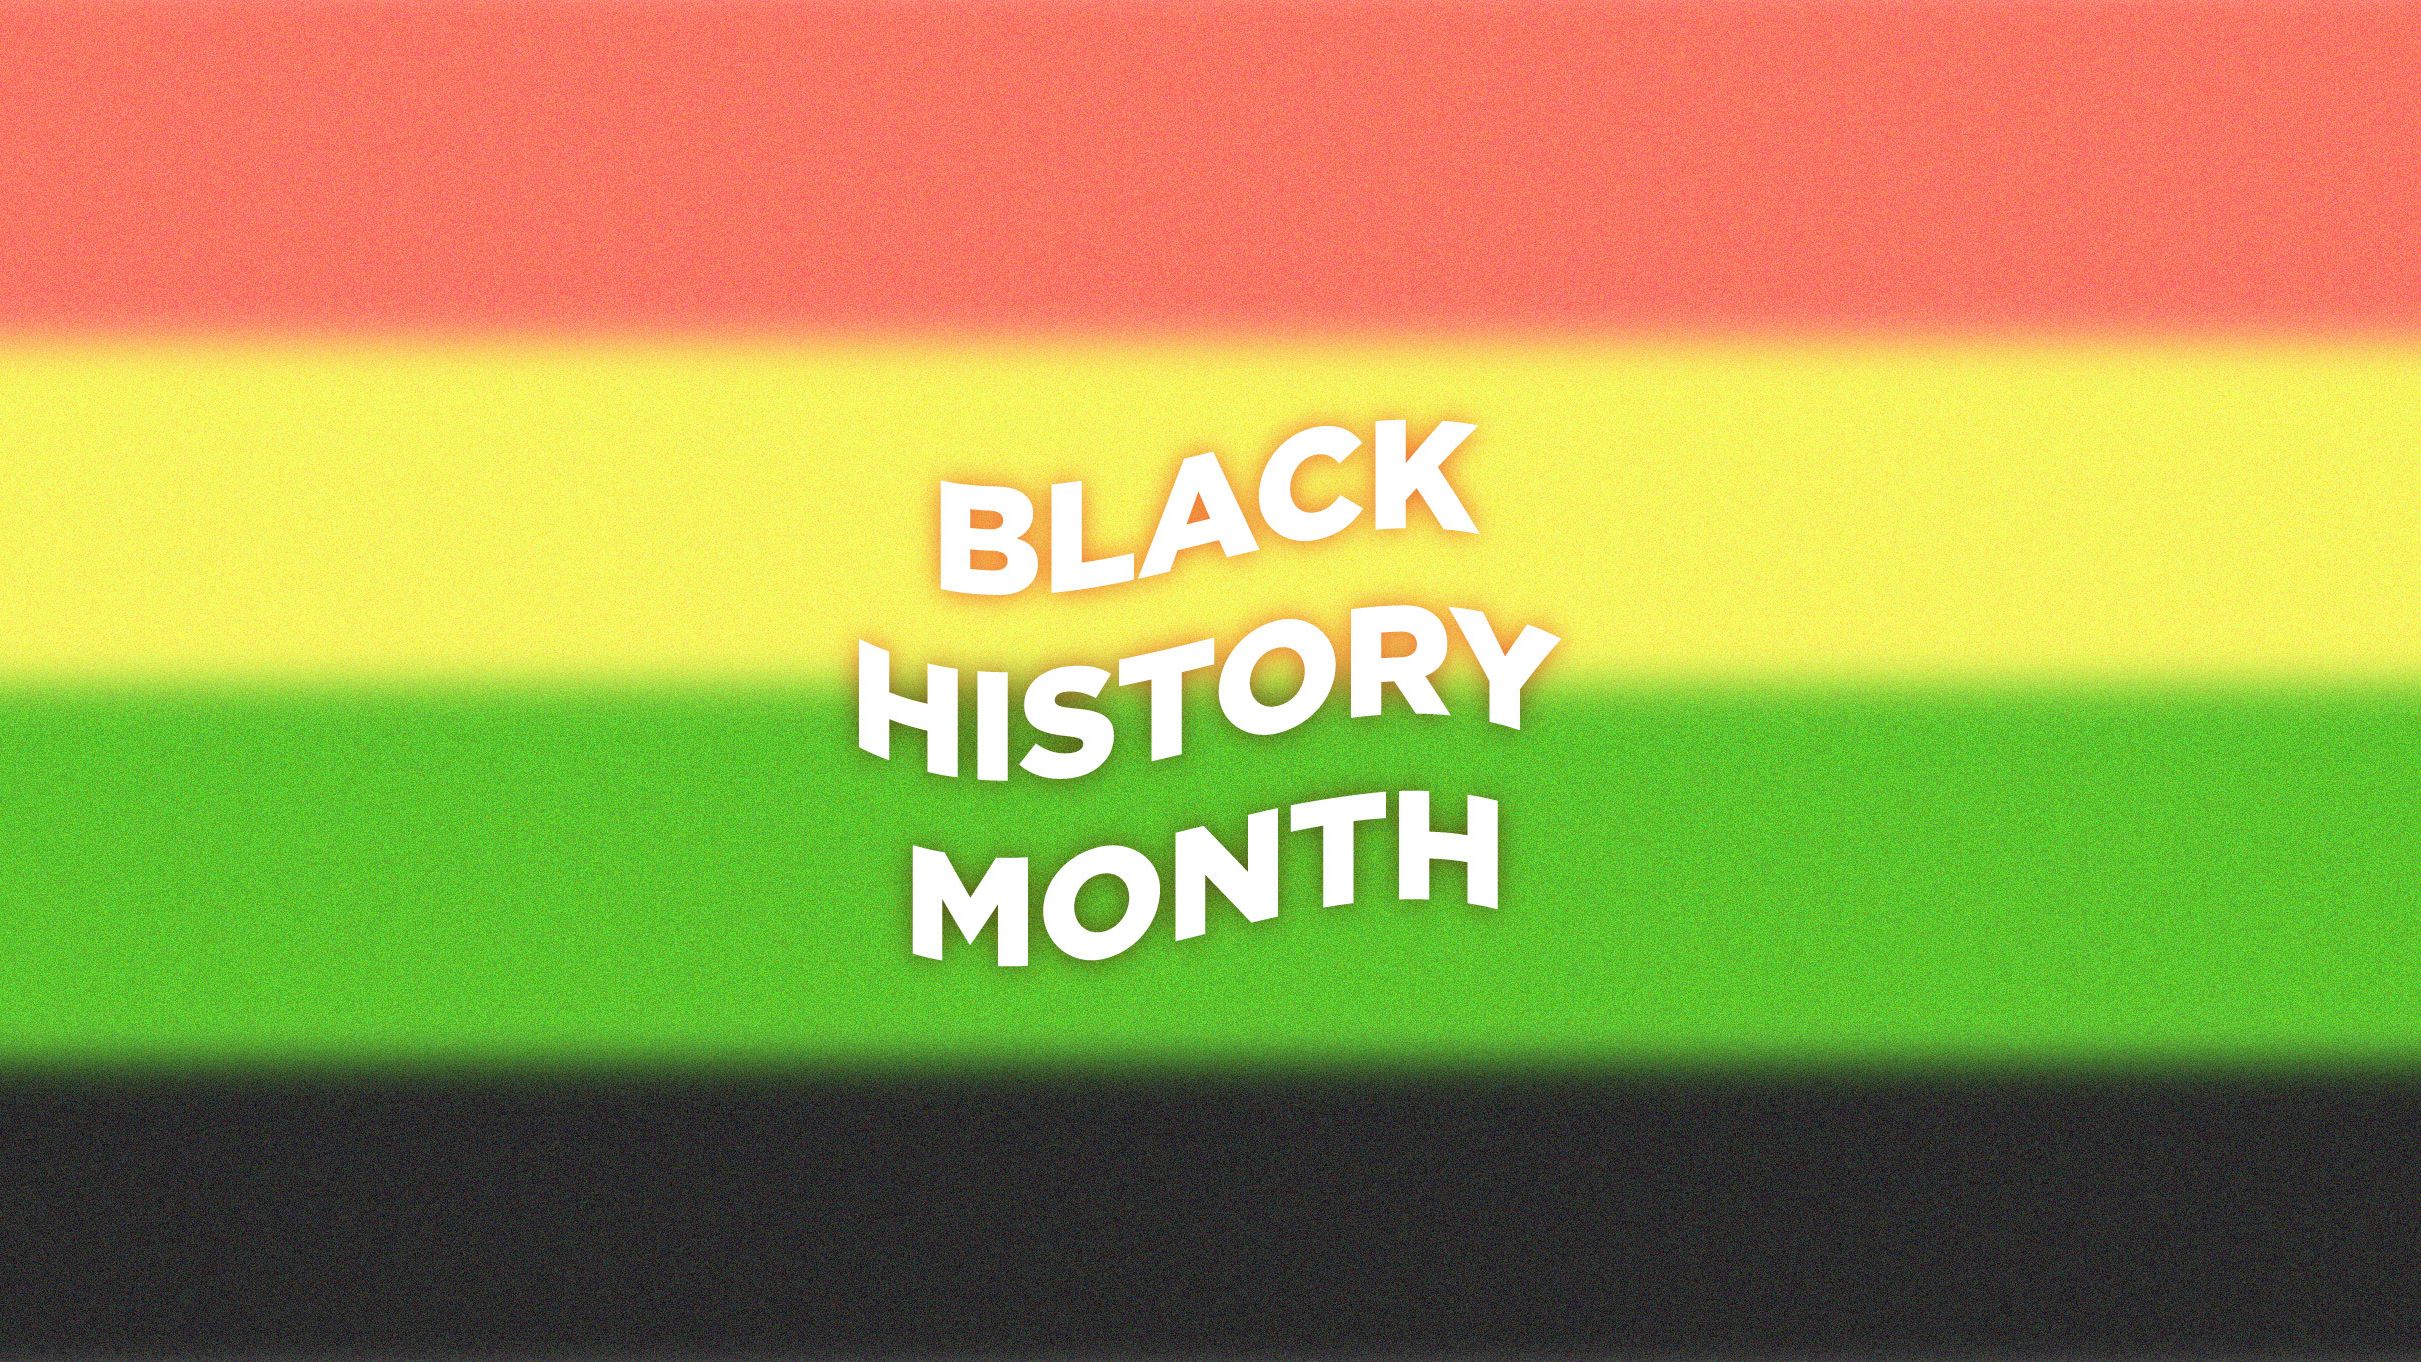 What Are the Black History Month Colors and What Do They Mean?